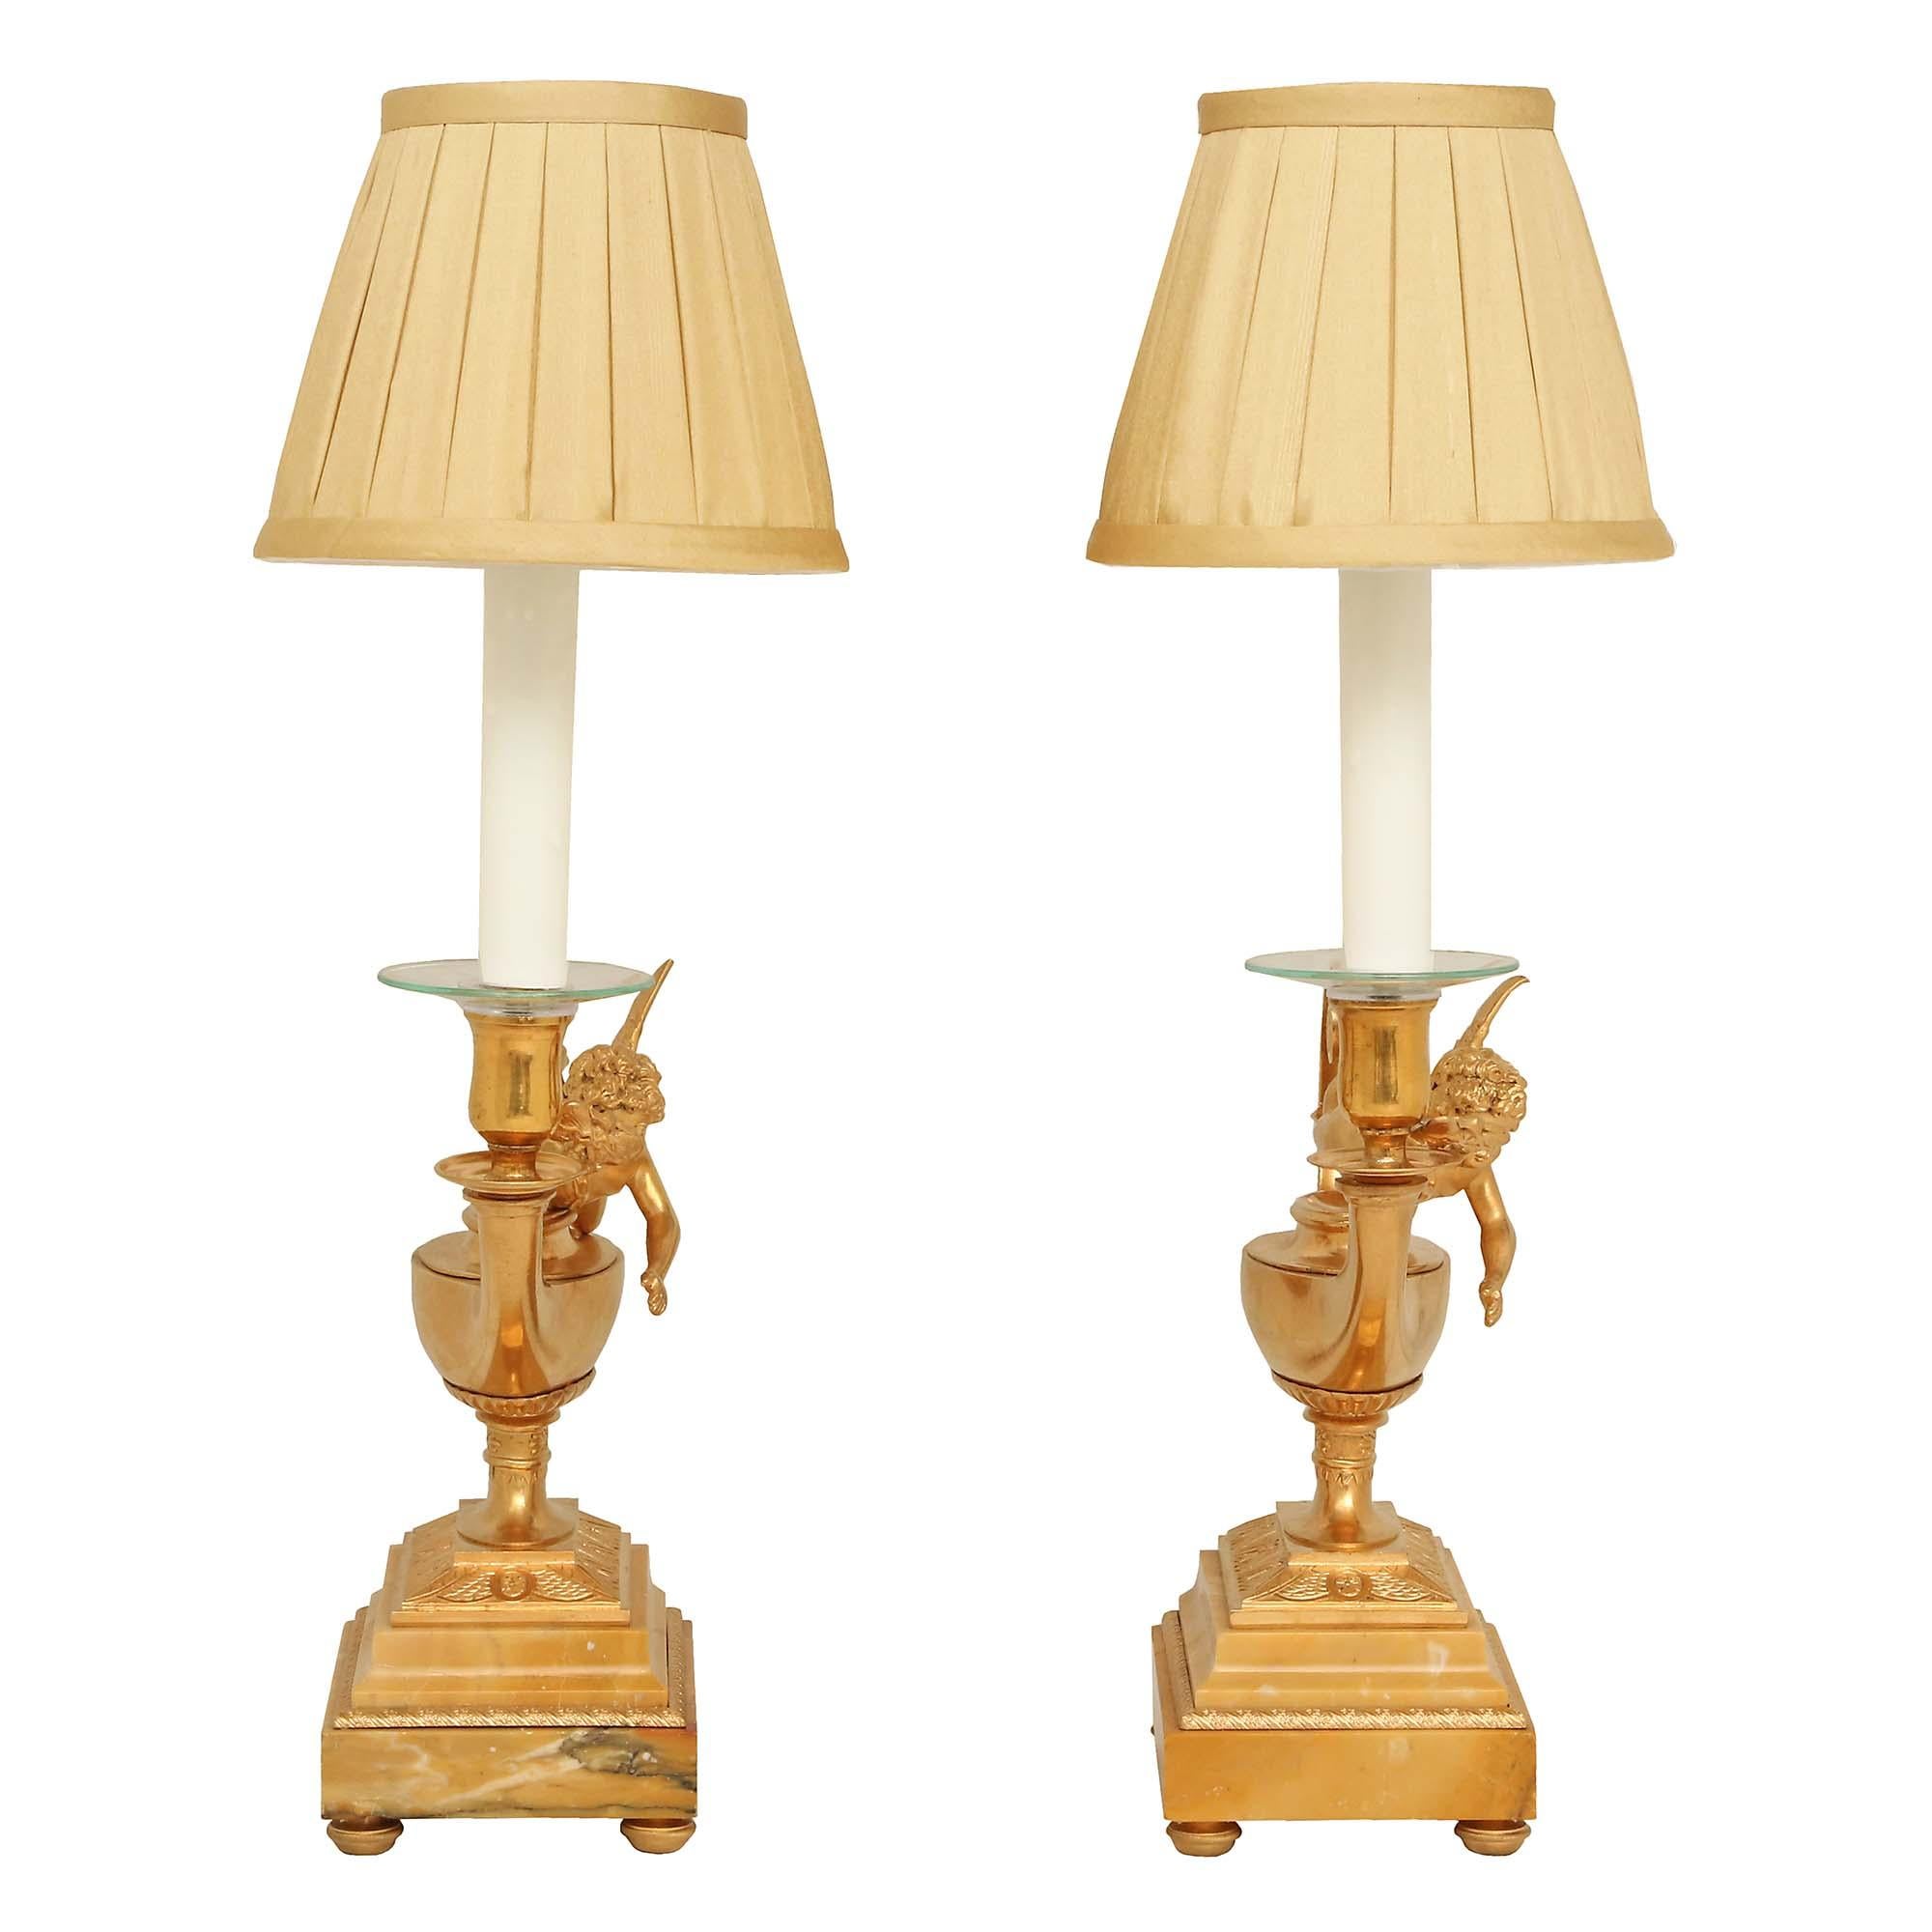 A superb pair of French 19th century Louis XVI st. ormolu and marble lamps. Raised on ormolu bun feet below a rectangular sienna marble base with chased ormolu trim. Above each is a raised platform with foliate chasings supporting the ormolu oil